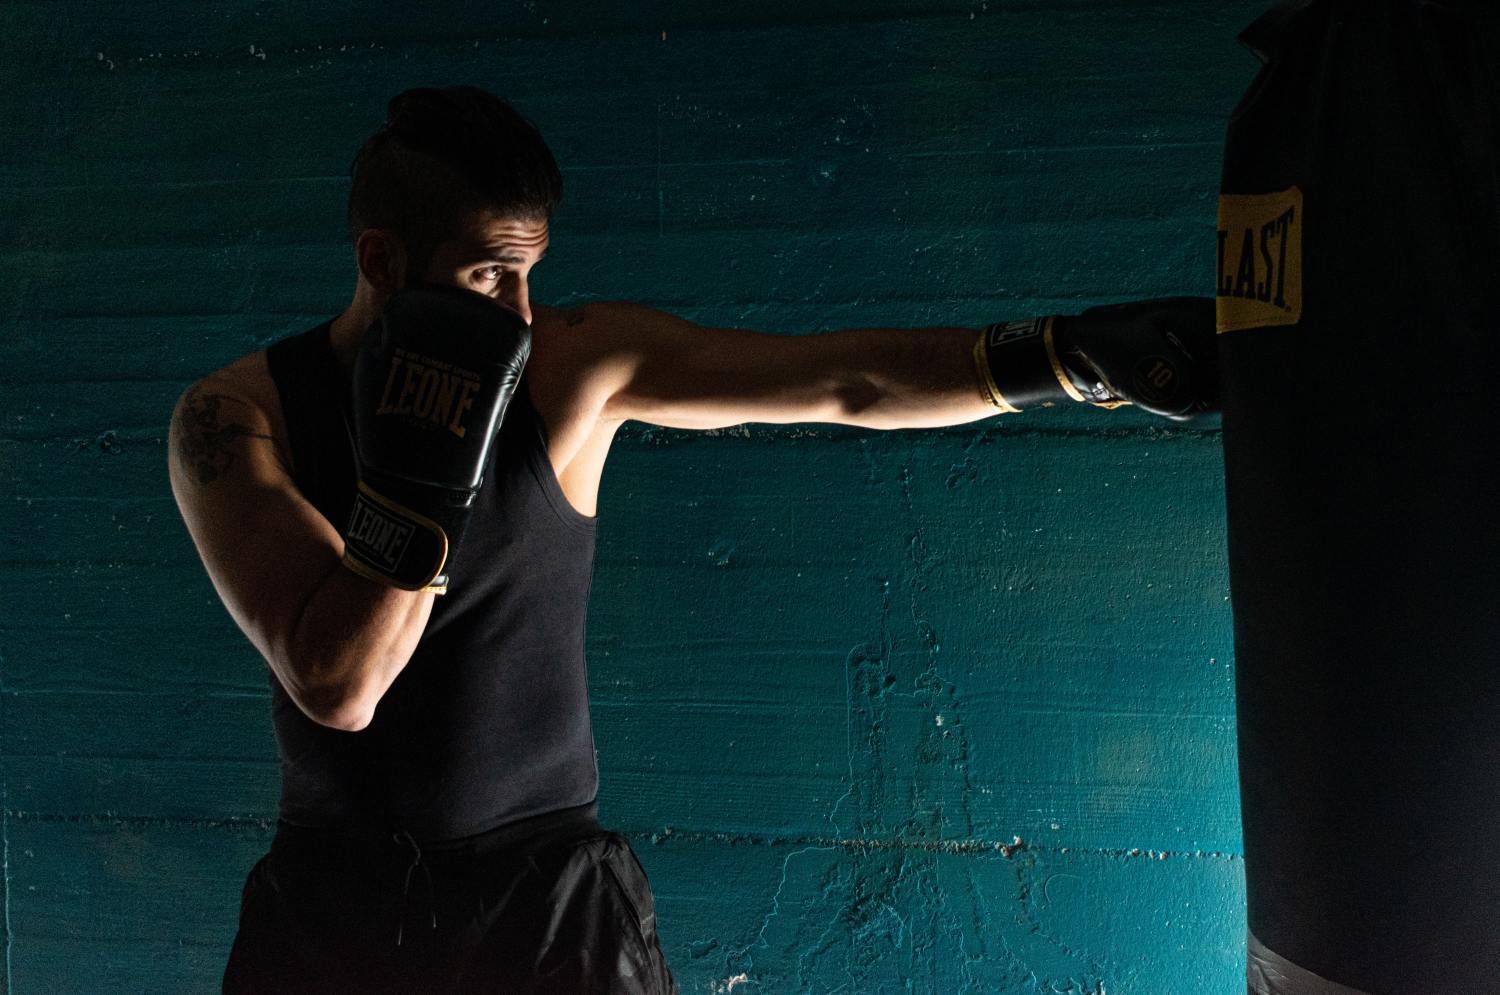 Know Before You Go: Kickboxing